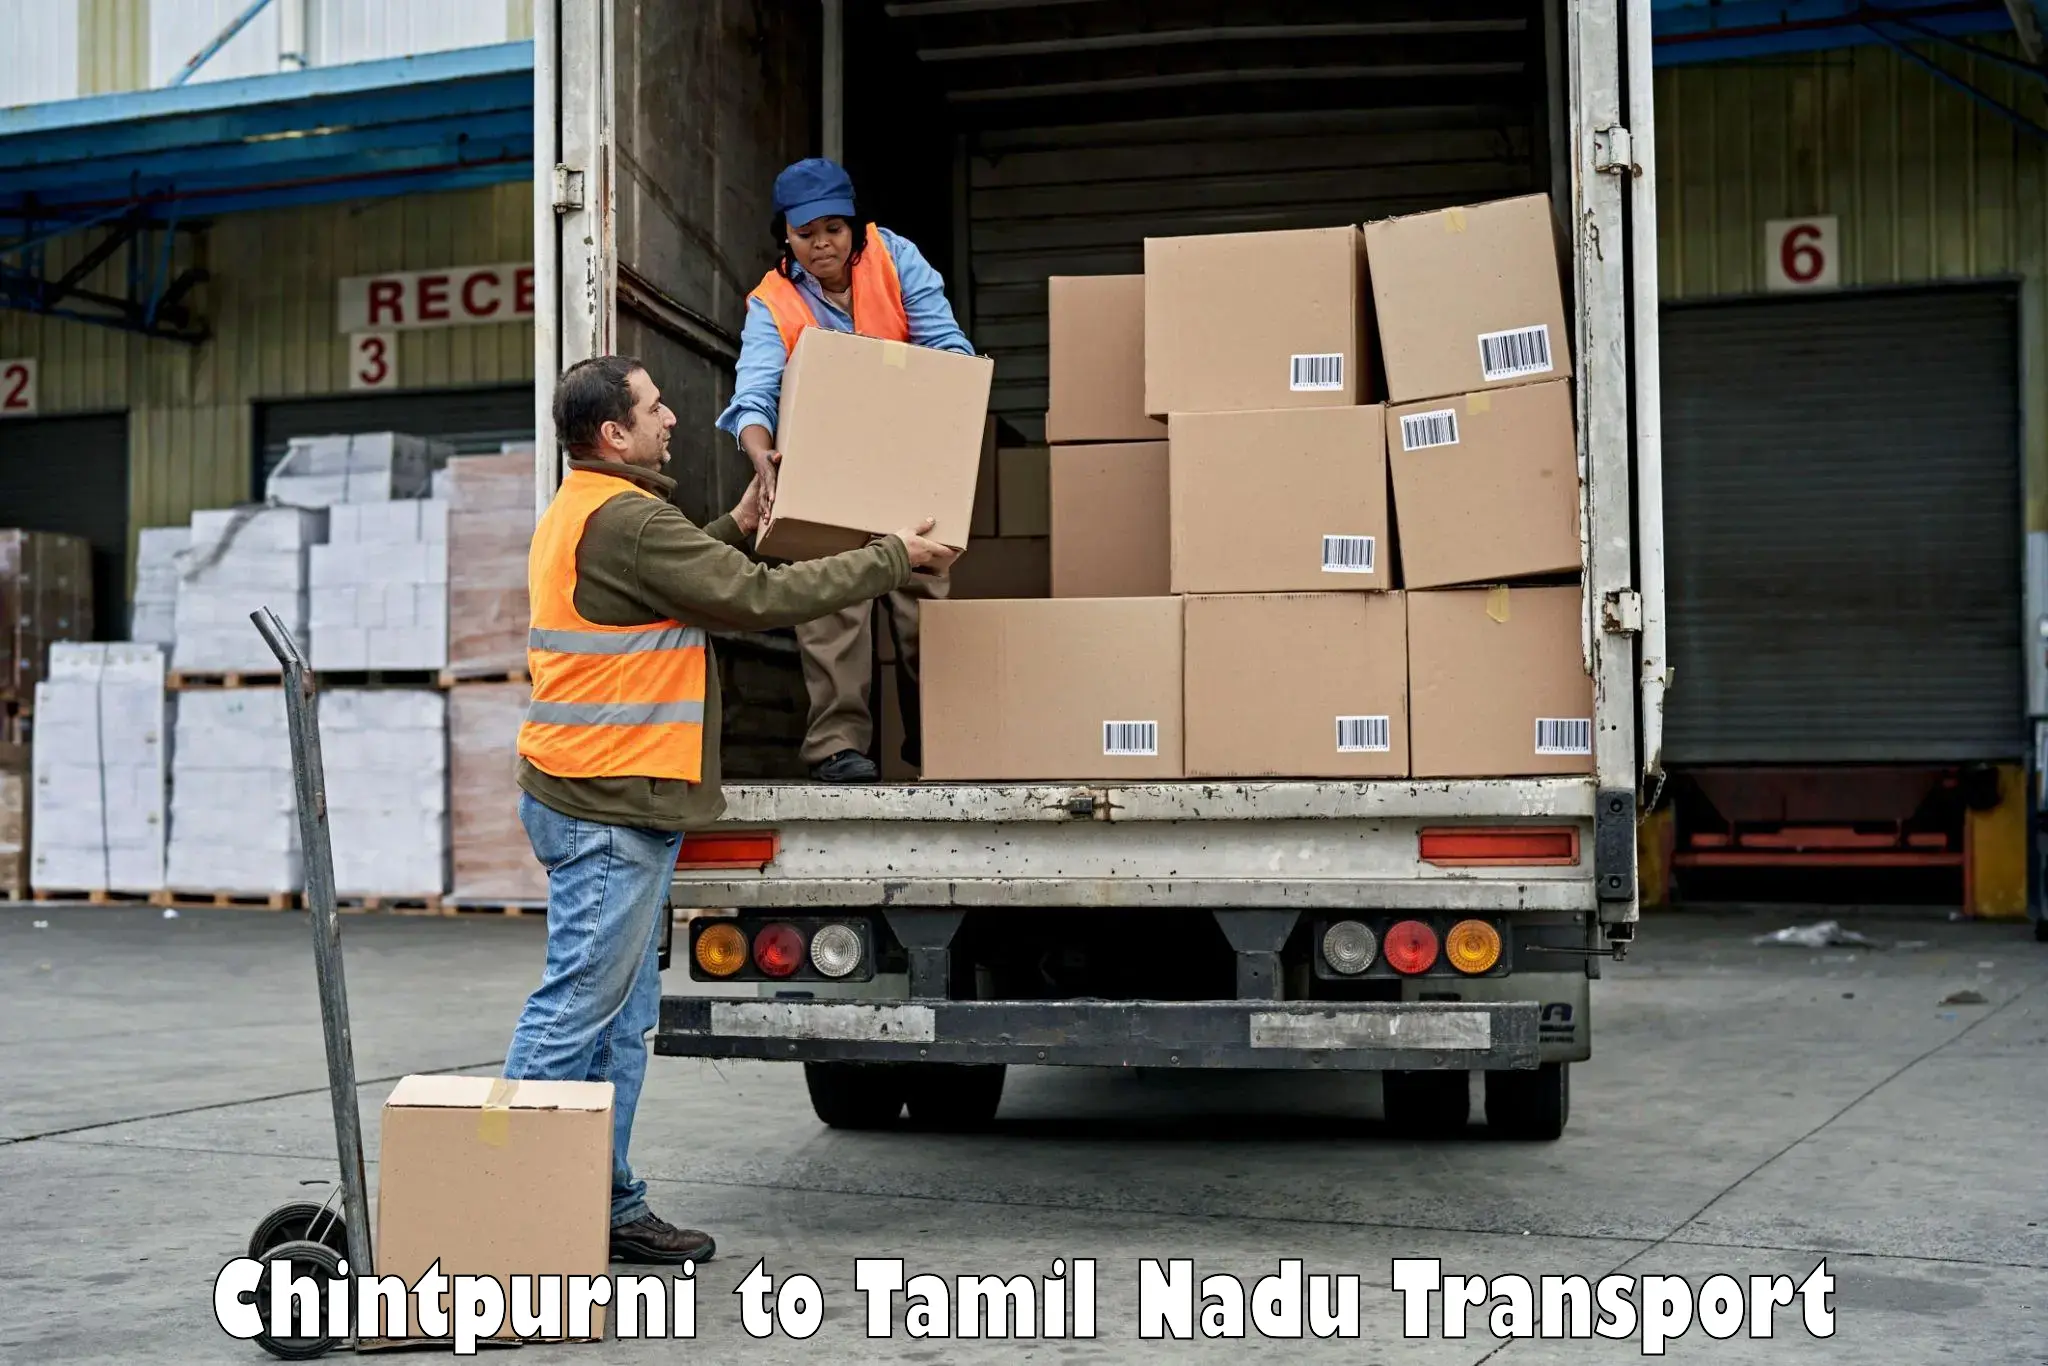 Lorry transport service in Chintpurni to Coonoor